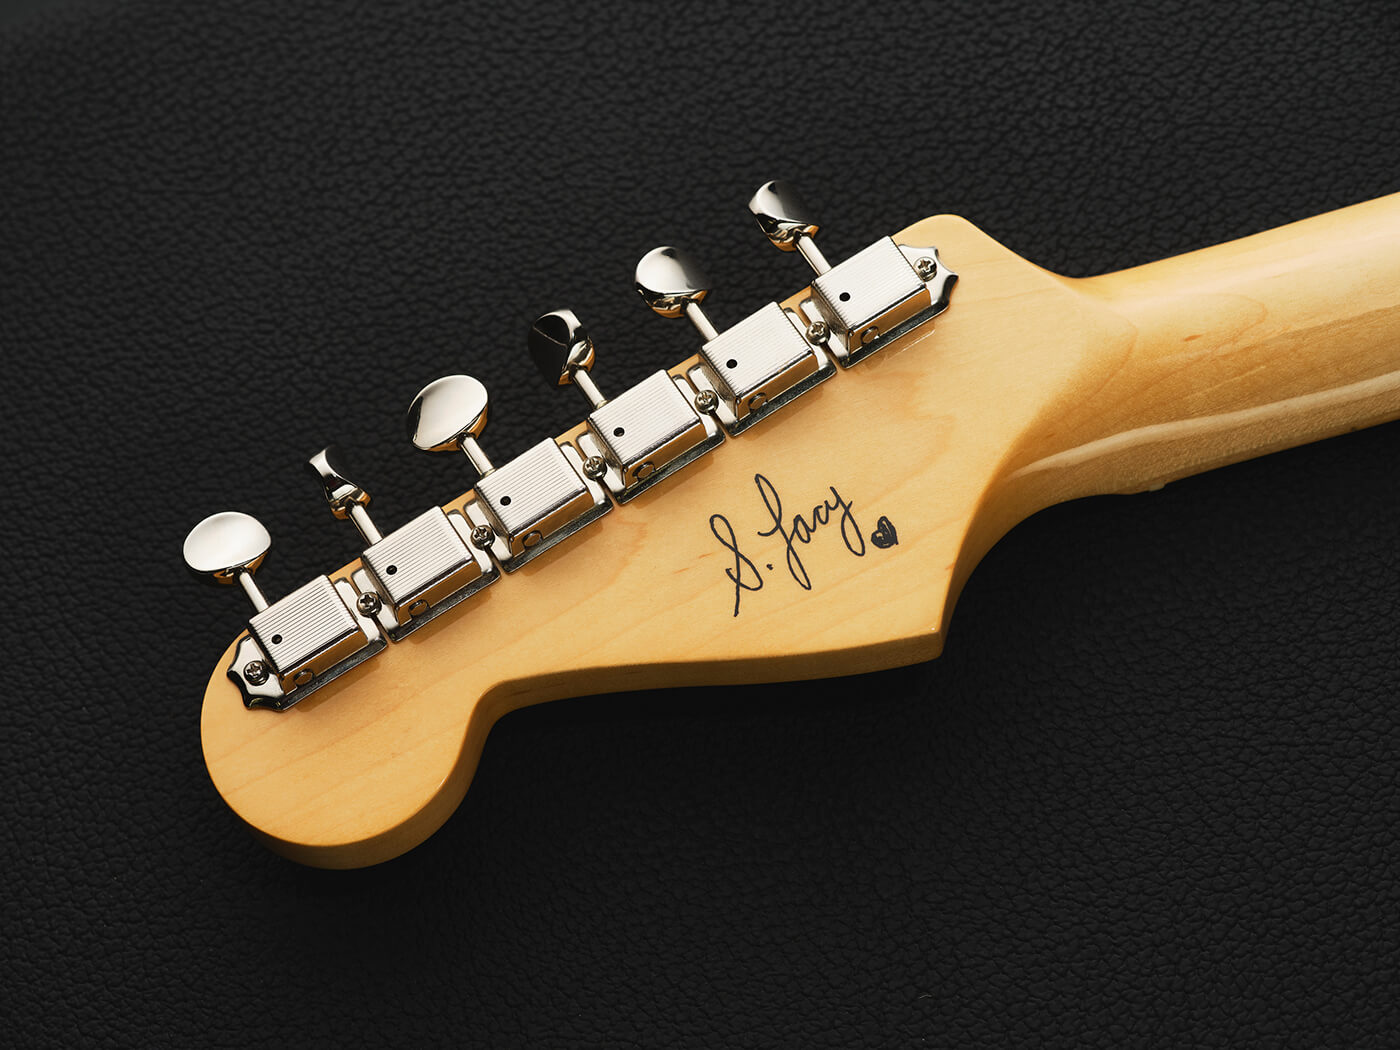 Steve Lacy’s signature on the Fender Steve Lacy People Pleaser Stratocaster by Adam Gasson